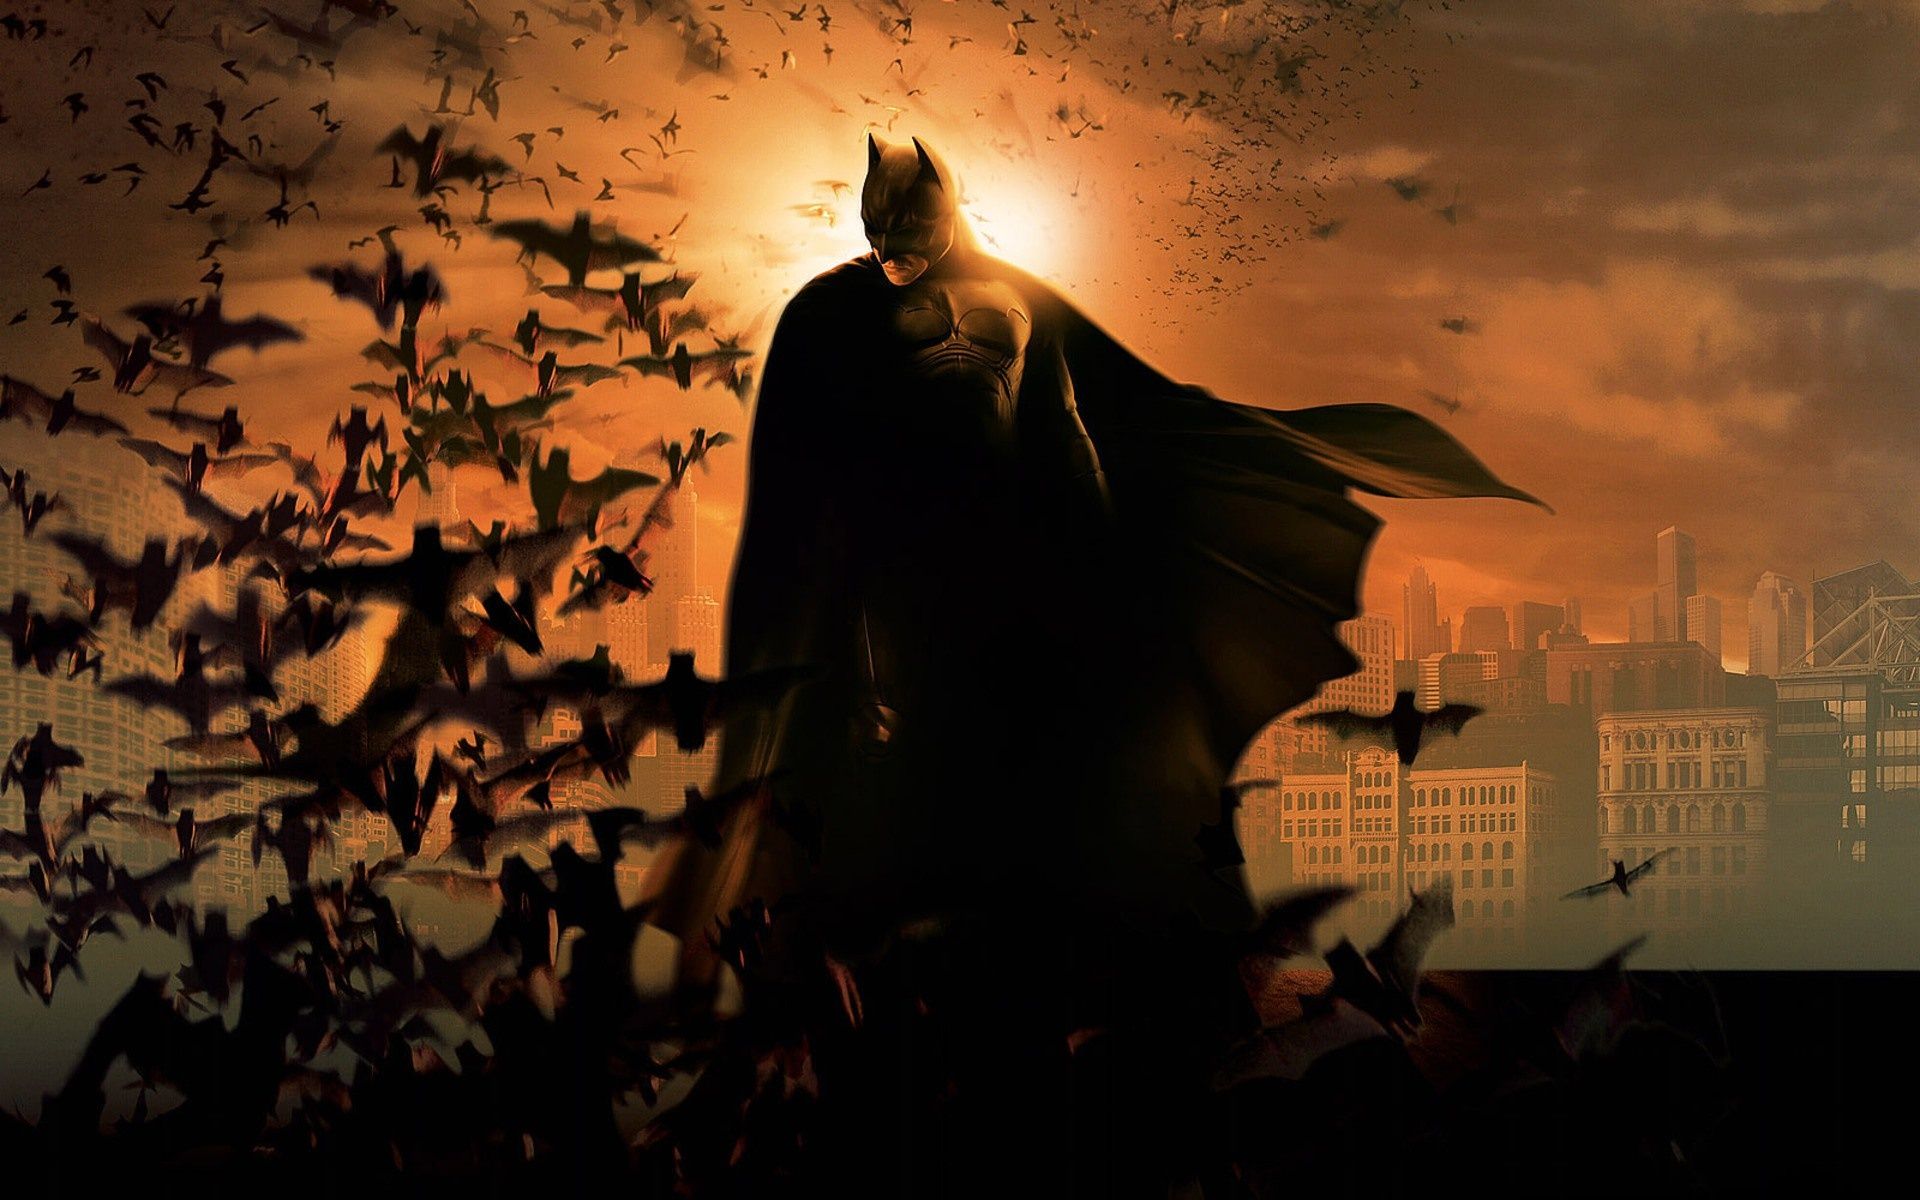 Batman Wallpapers for Computer 5189 - HD Wallpapers Site